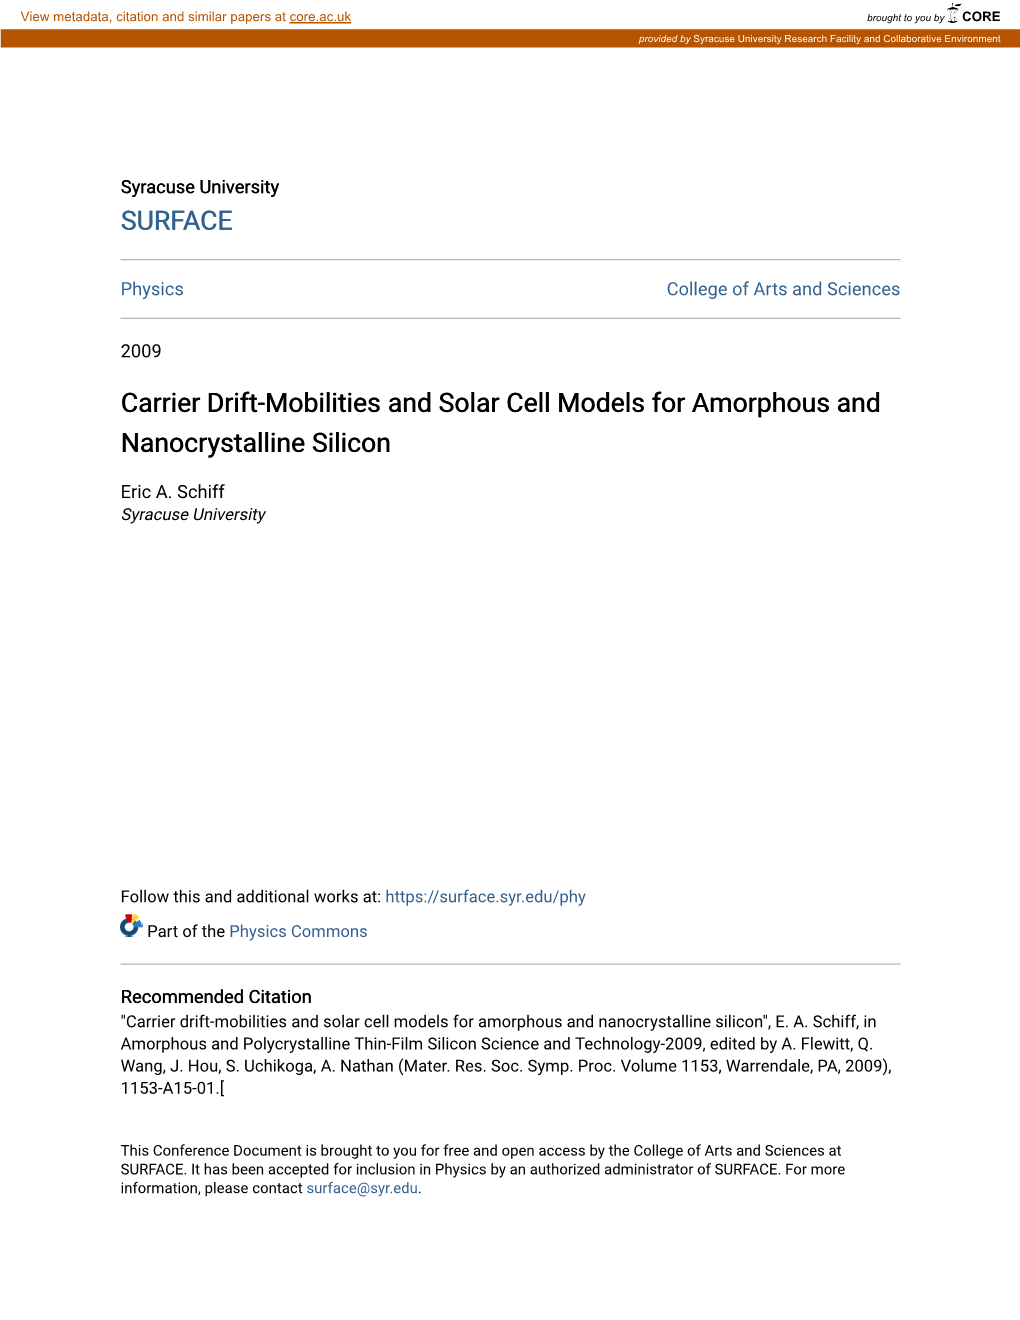 Carrier Drift-Mobilities and Solar Cell Models for Amorphous and Nanocrystalline Silicon